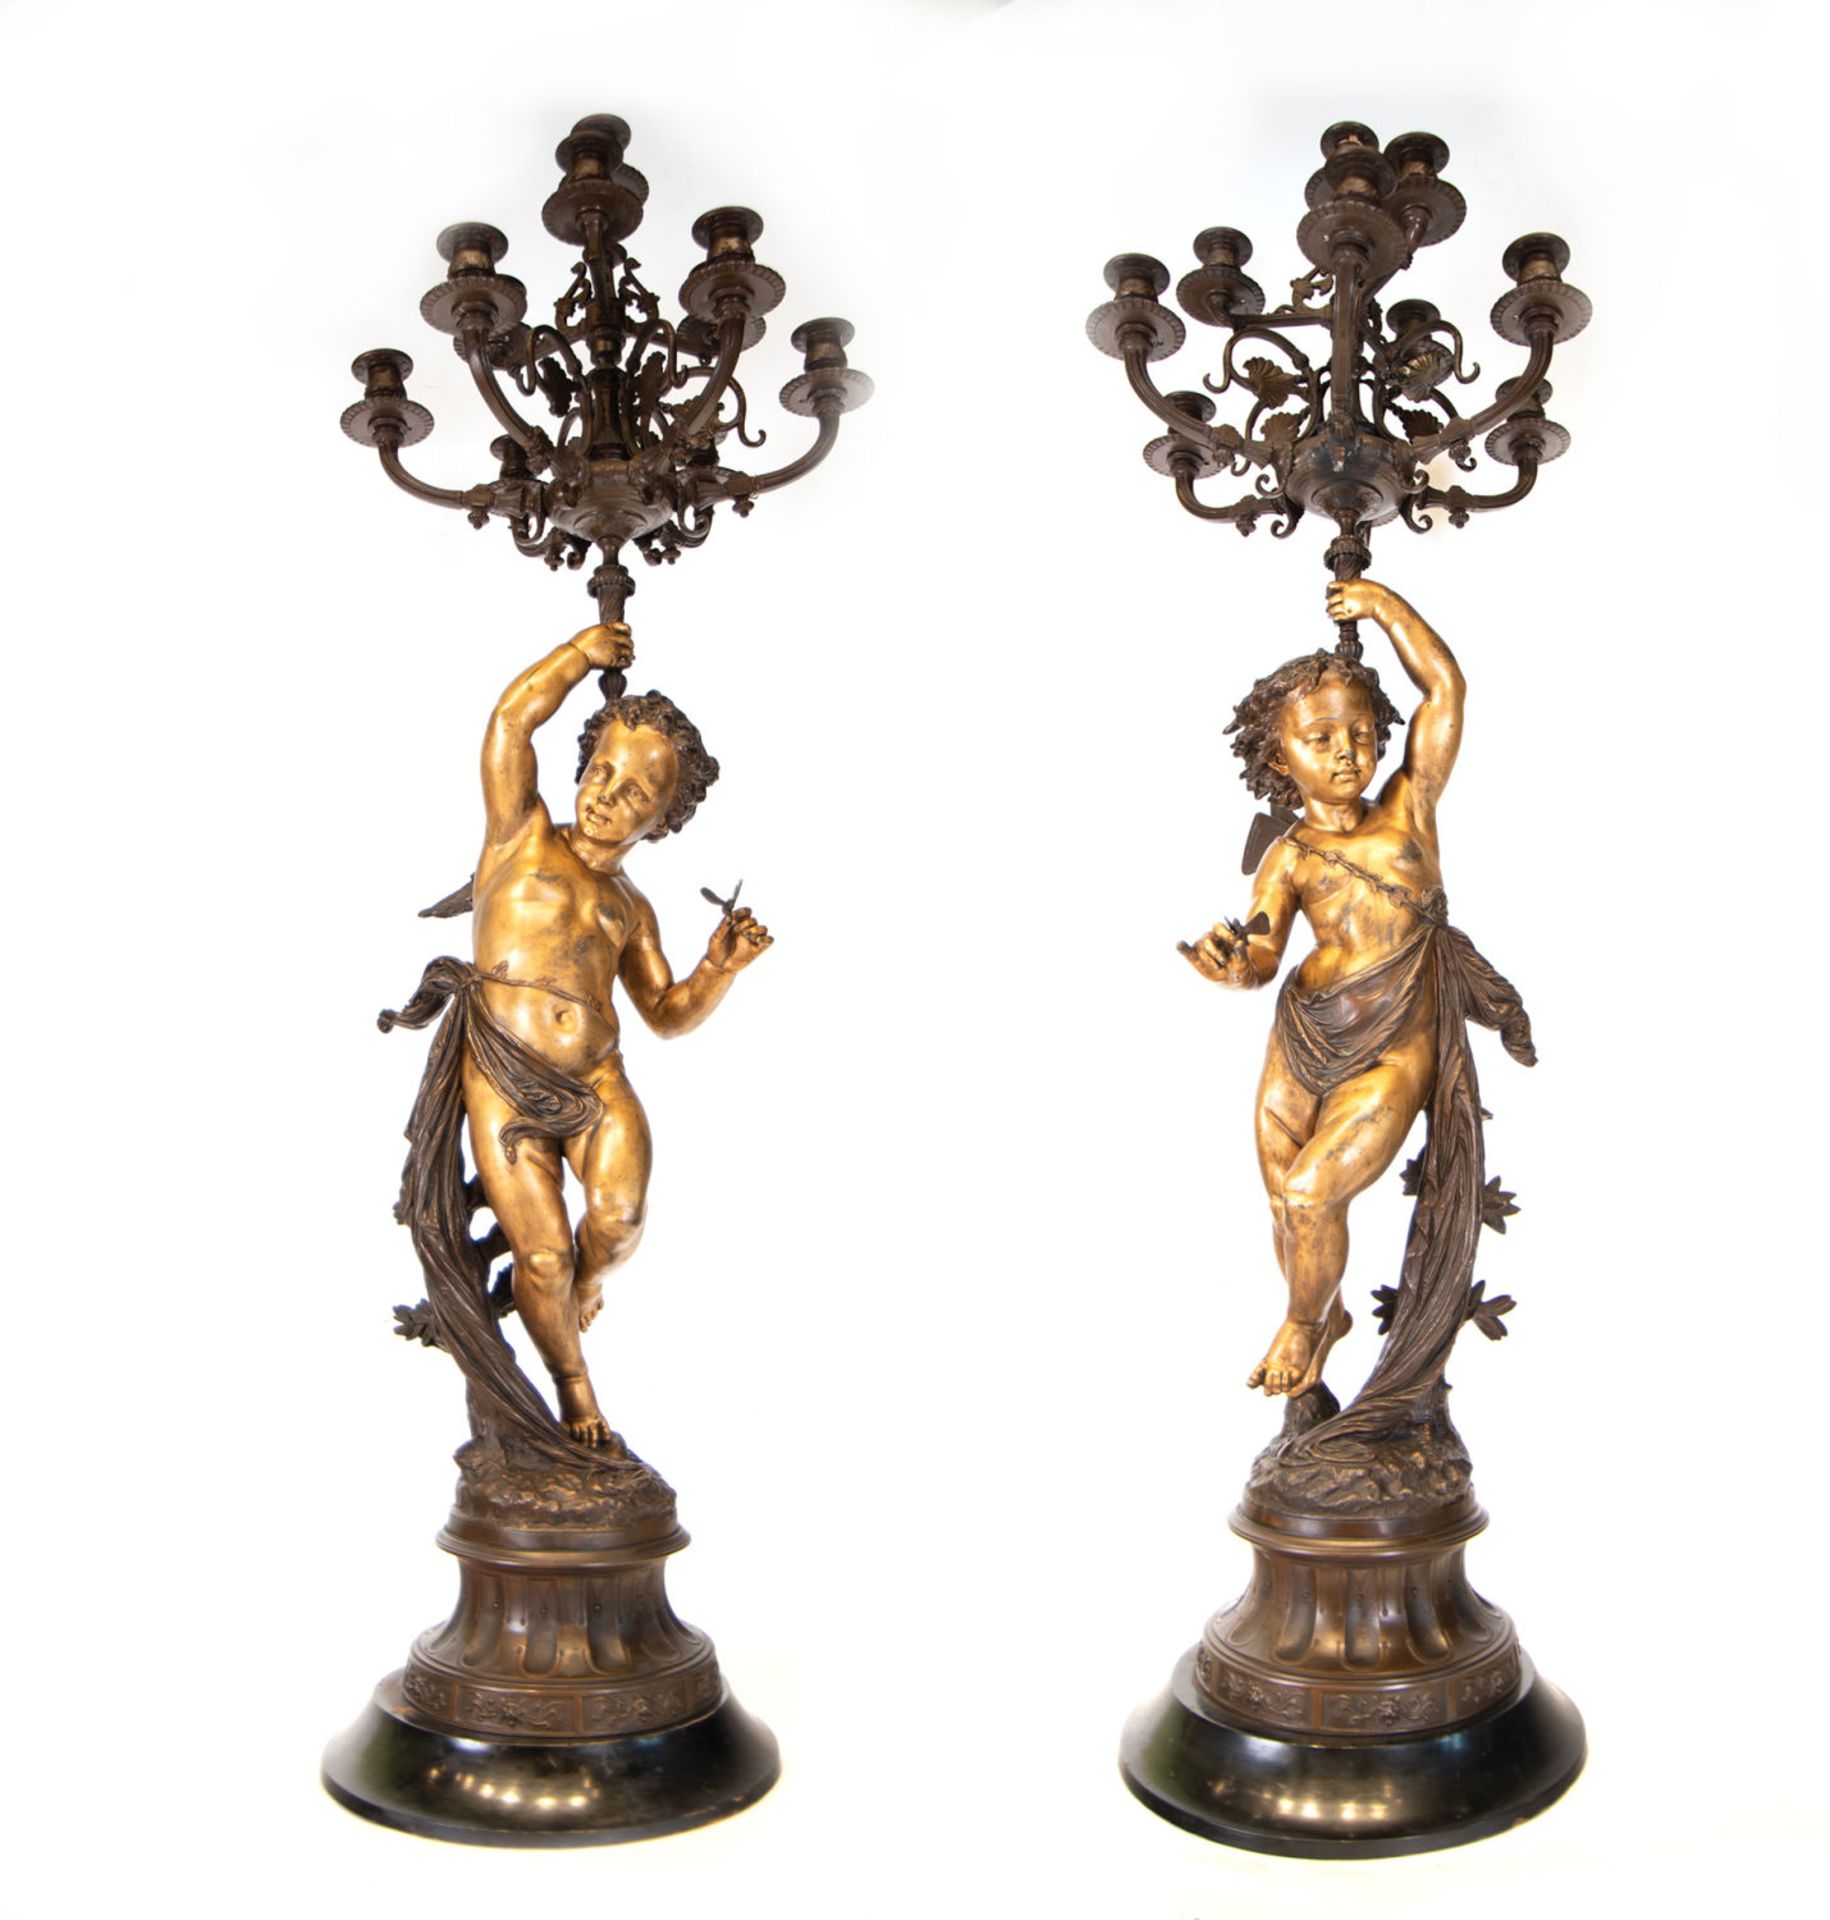 Massive Pair of French 19th Gilt Bronze Torcheres in the manner of Jean Baptiste Carpeaux NO RESERVE